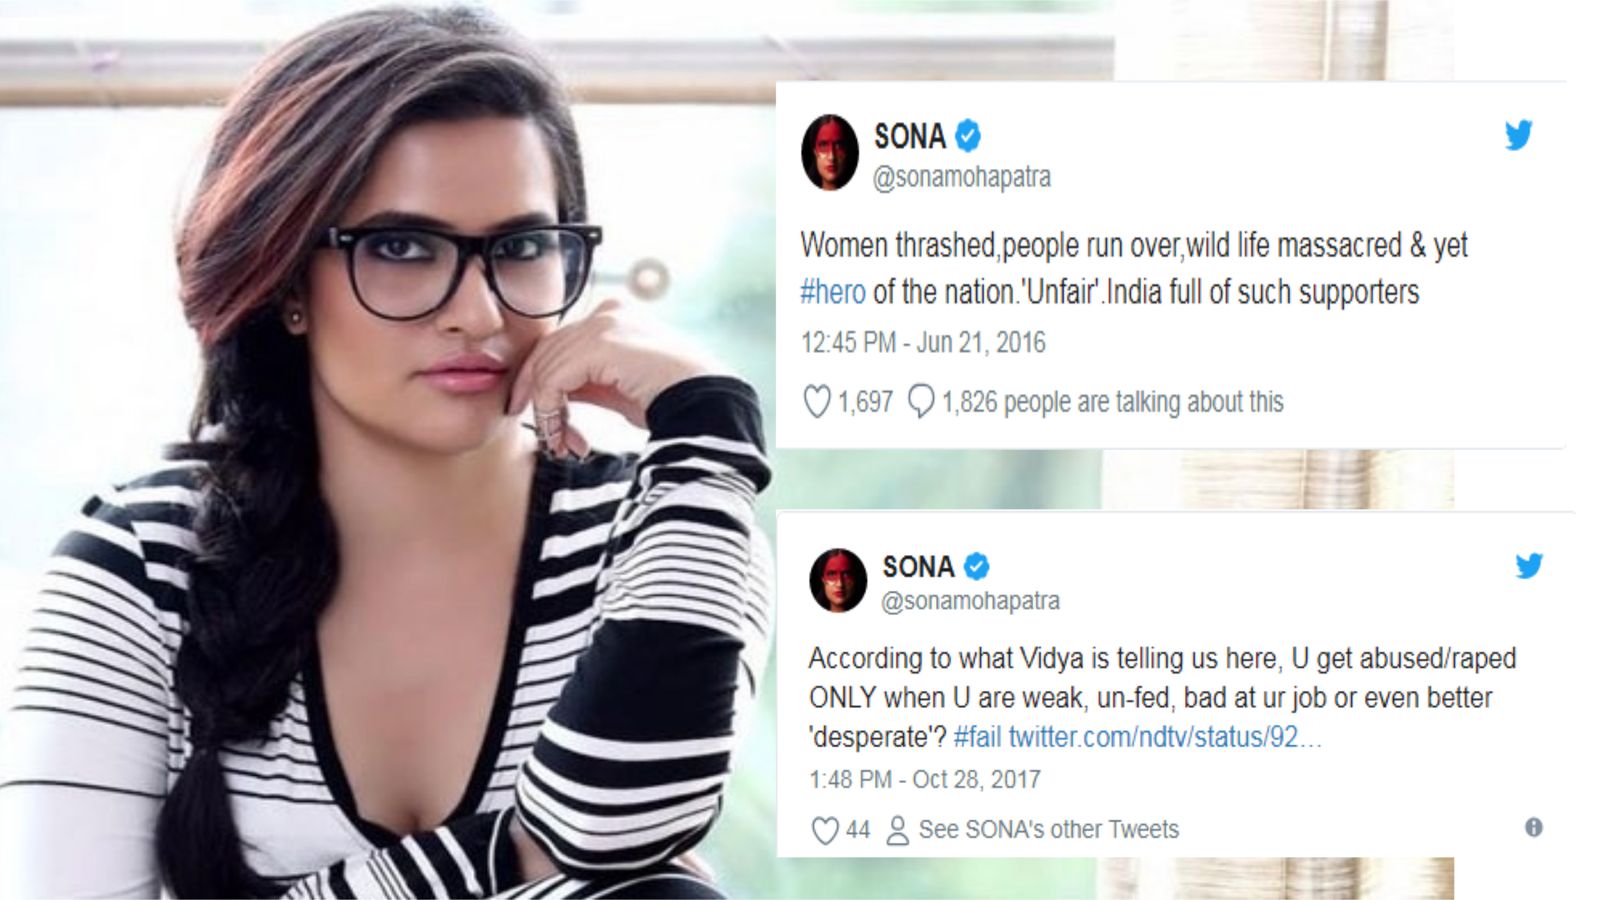 5 Tweets Of Sona Mohapatra That Made Headlines And Upset Her Bollywood Colleagues